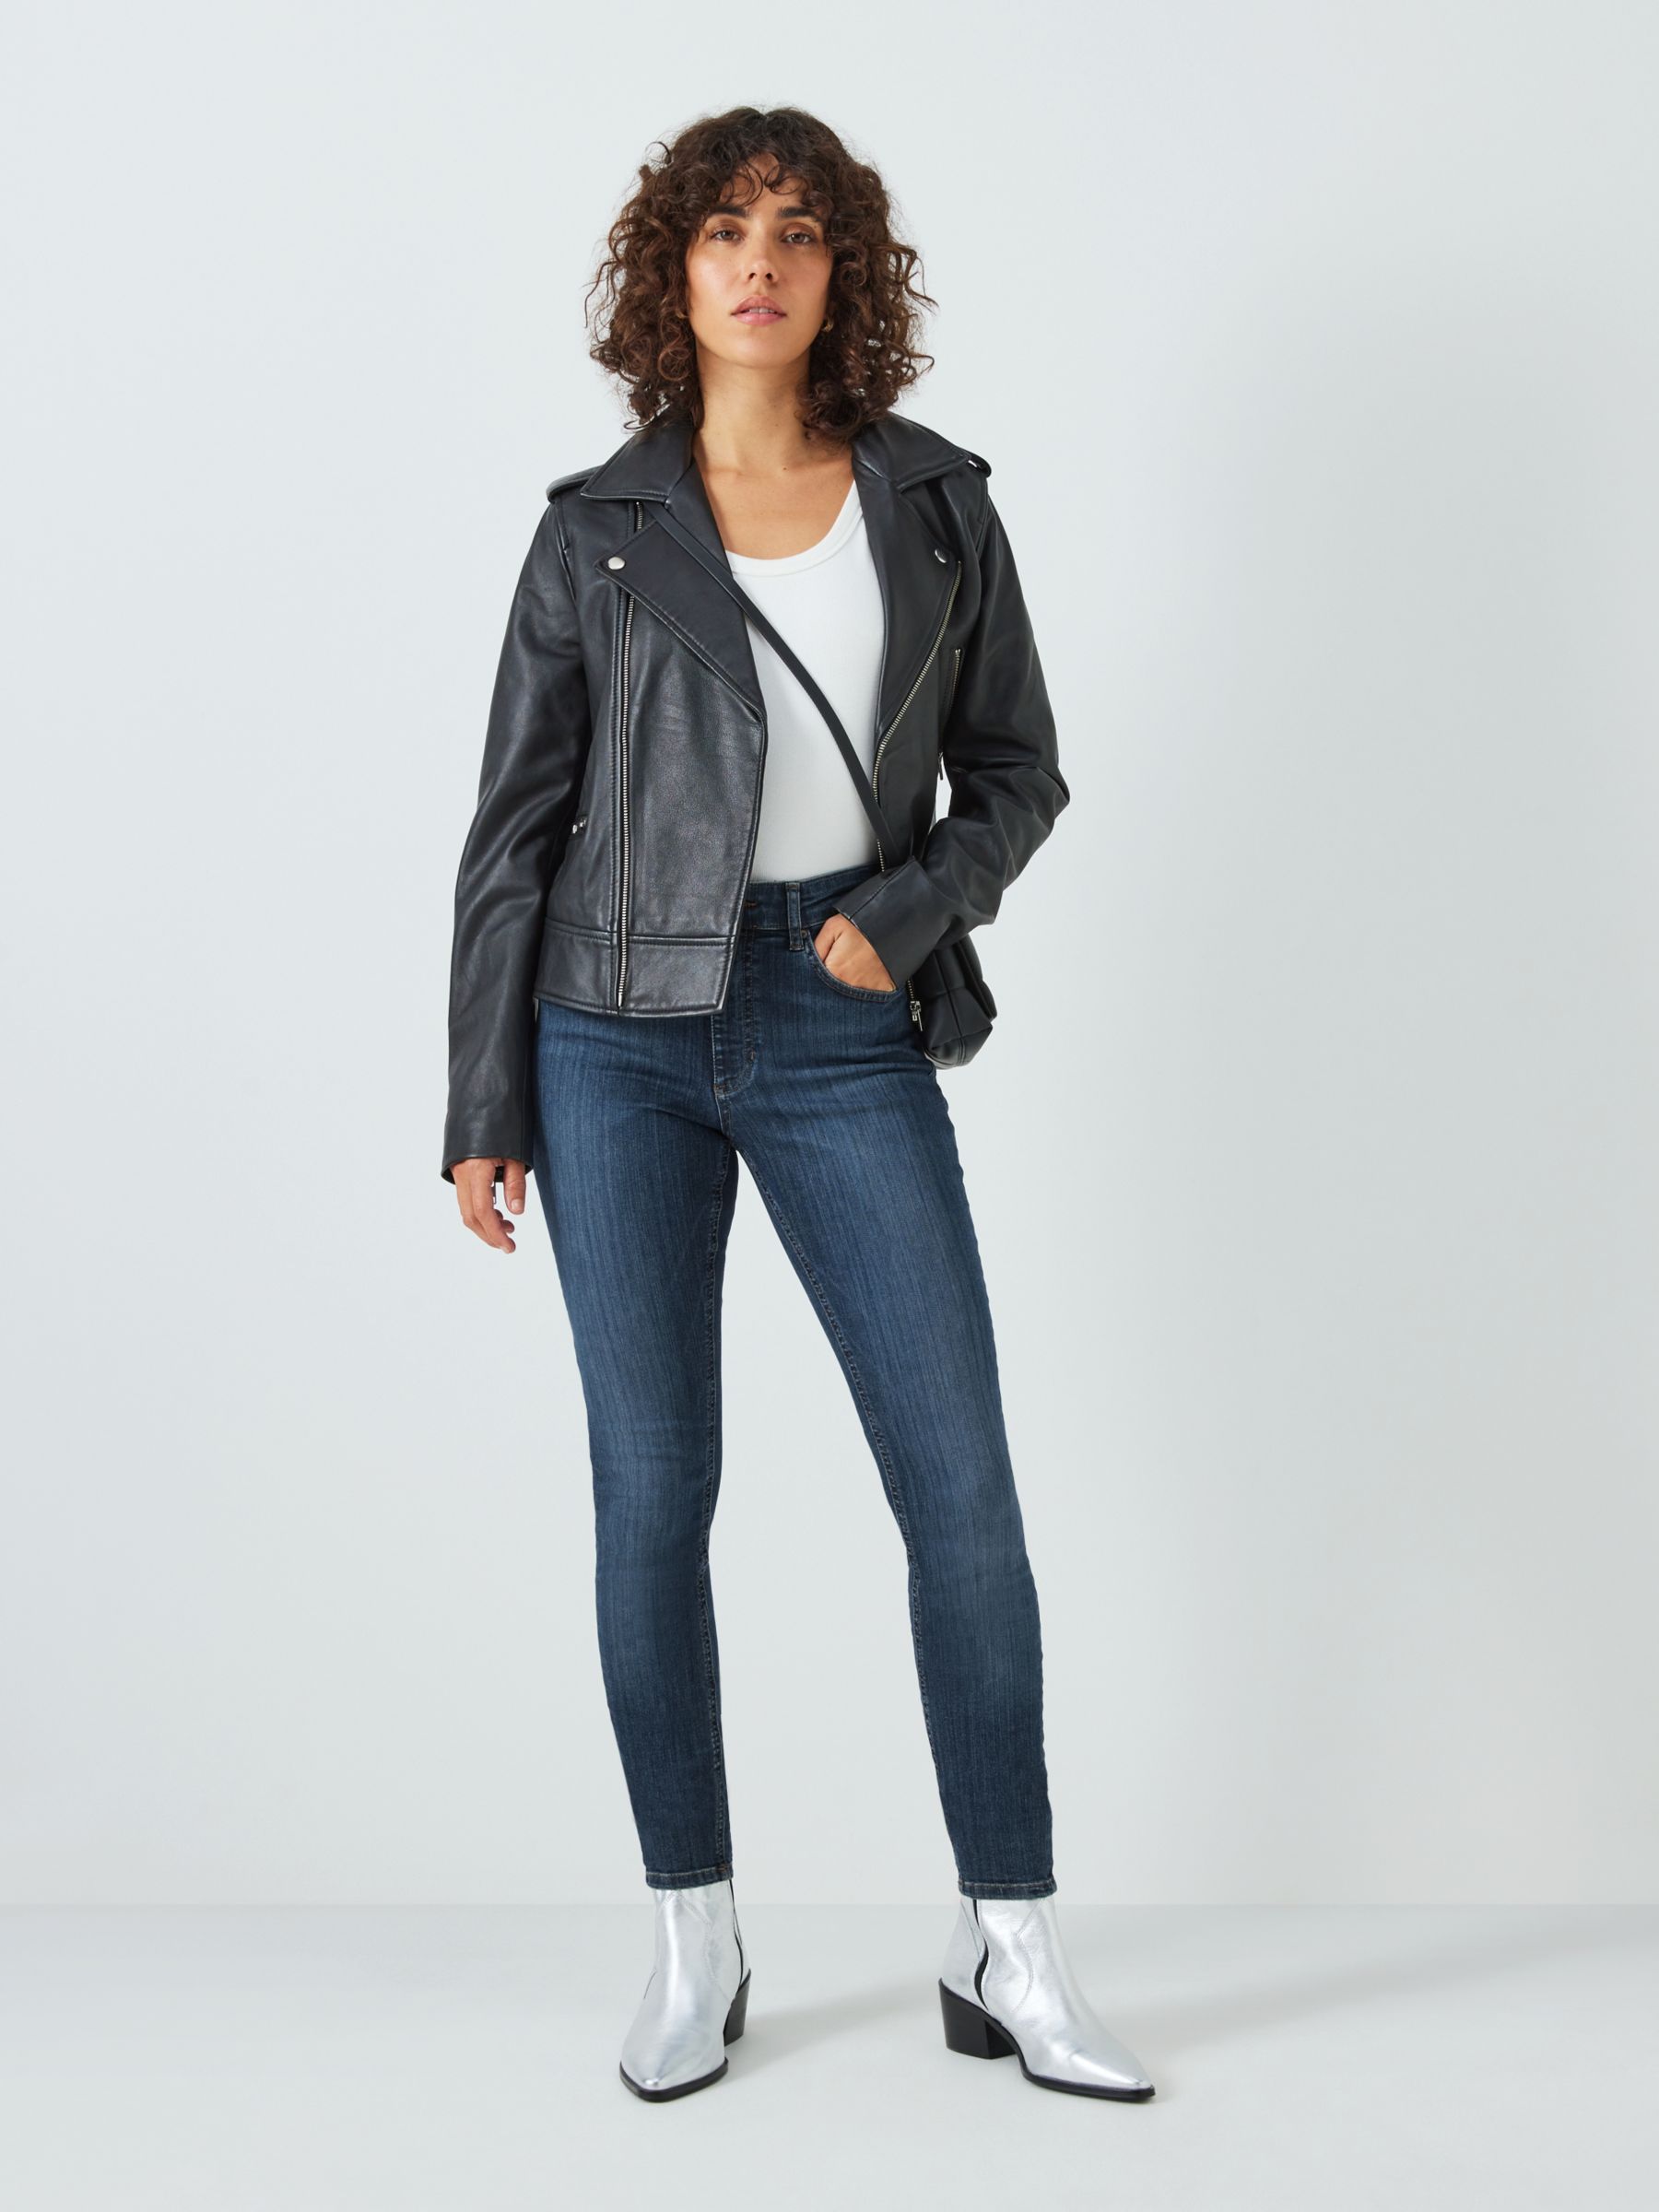 AND/OR Abbot Kinney Skinny Jeans, Vintage Perfected, 26